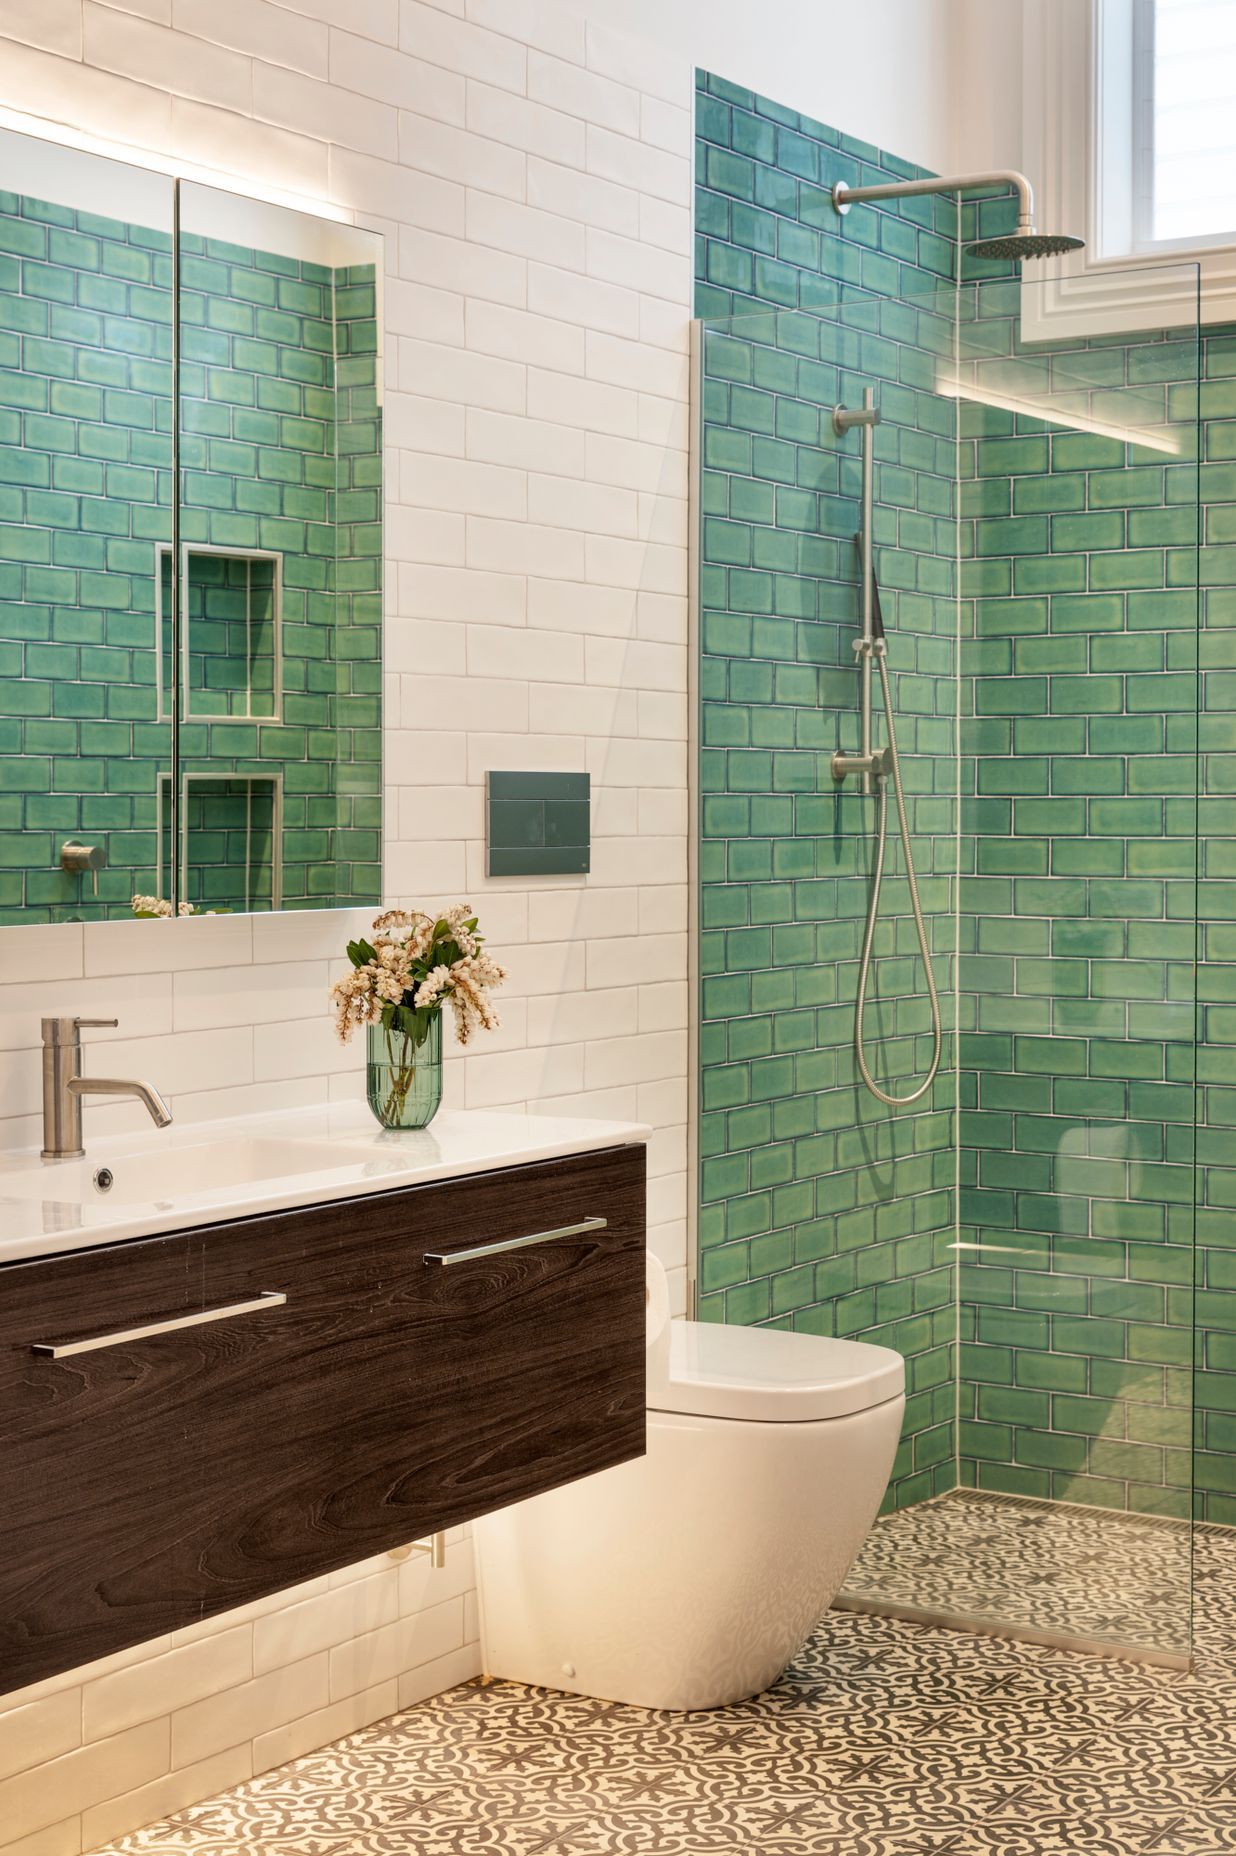 The ensuite bathroom features distinctive Victorian-style tiling on the walls and floor.